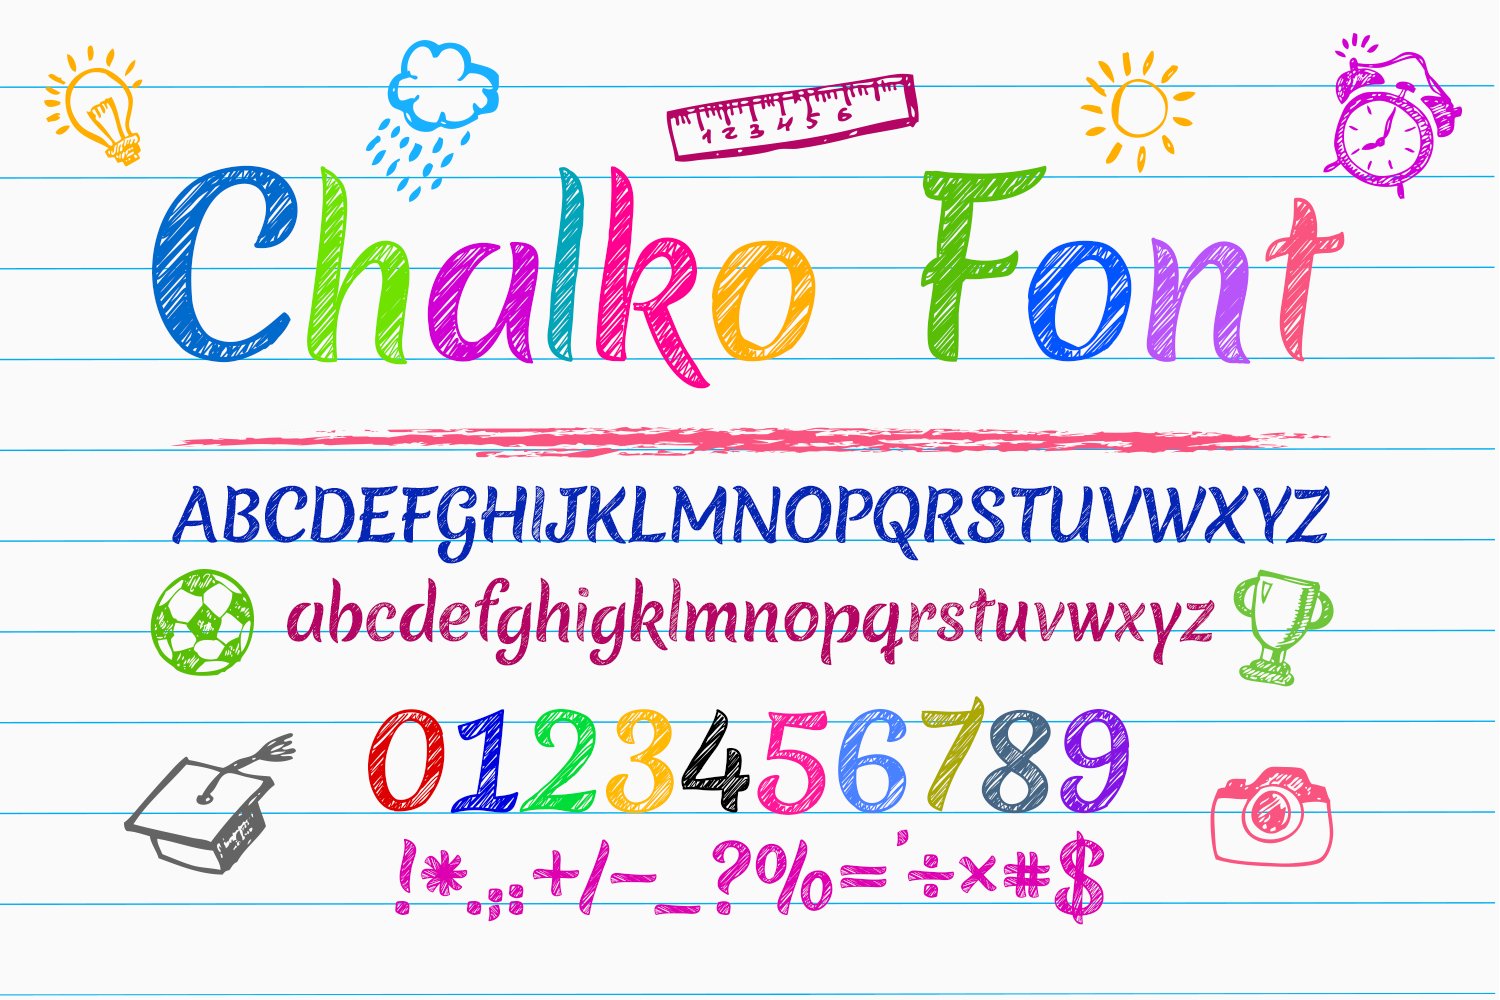 Chalko Font cover image.